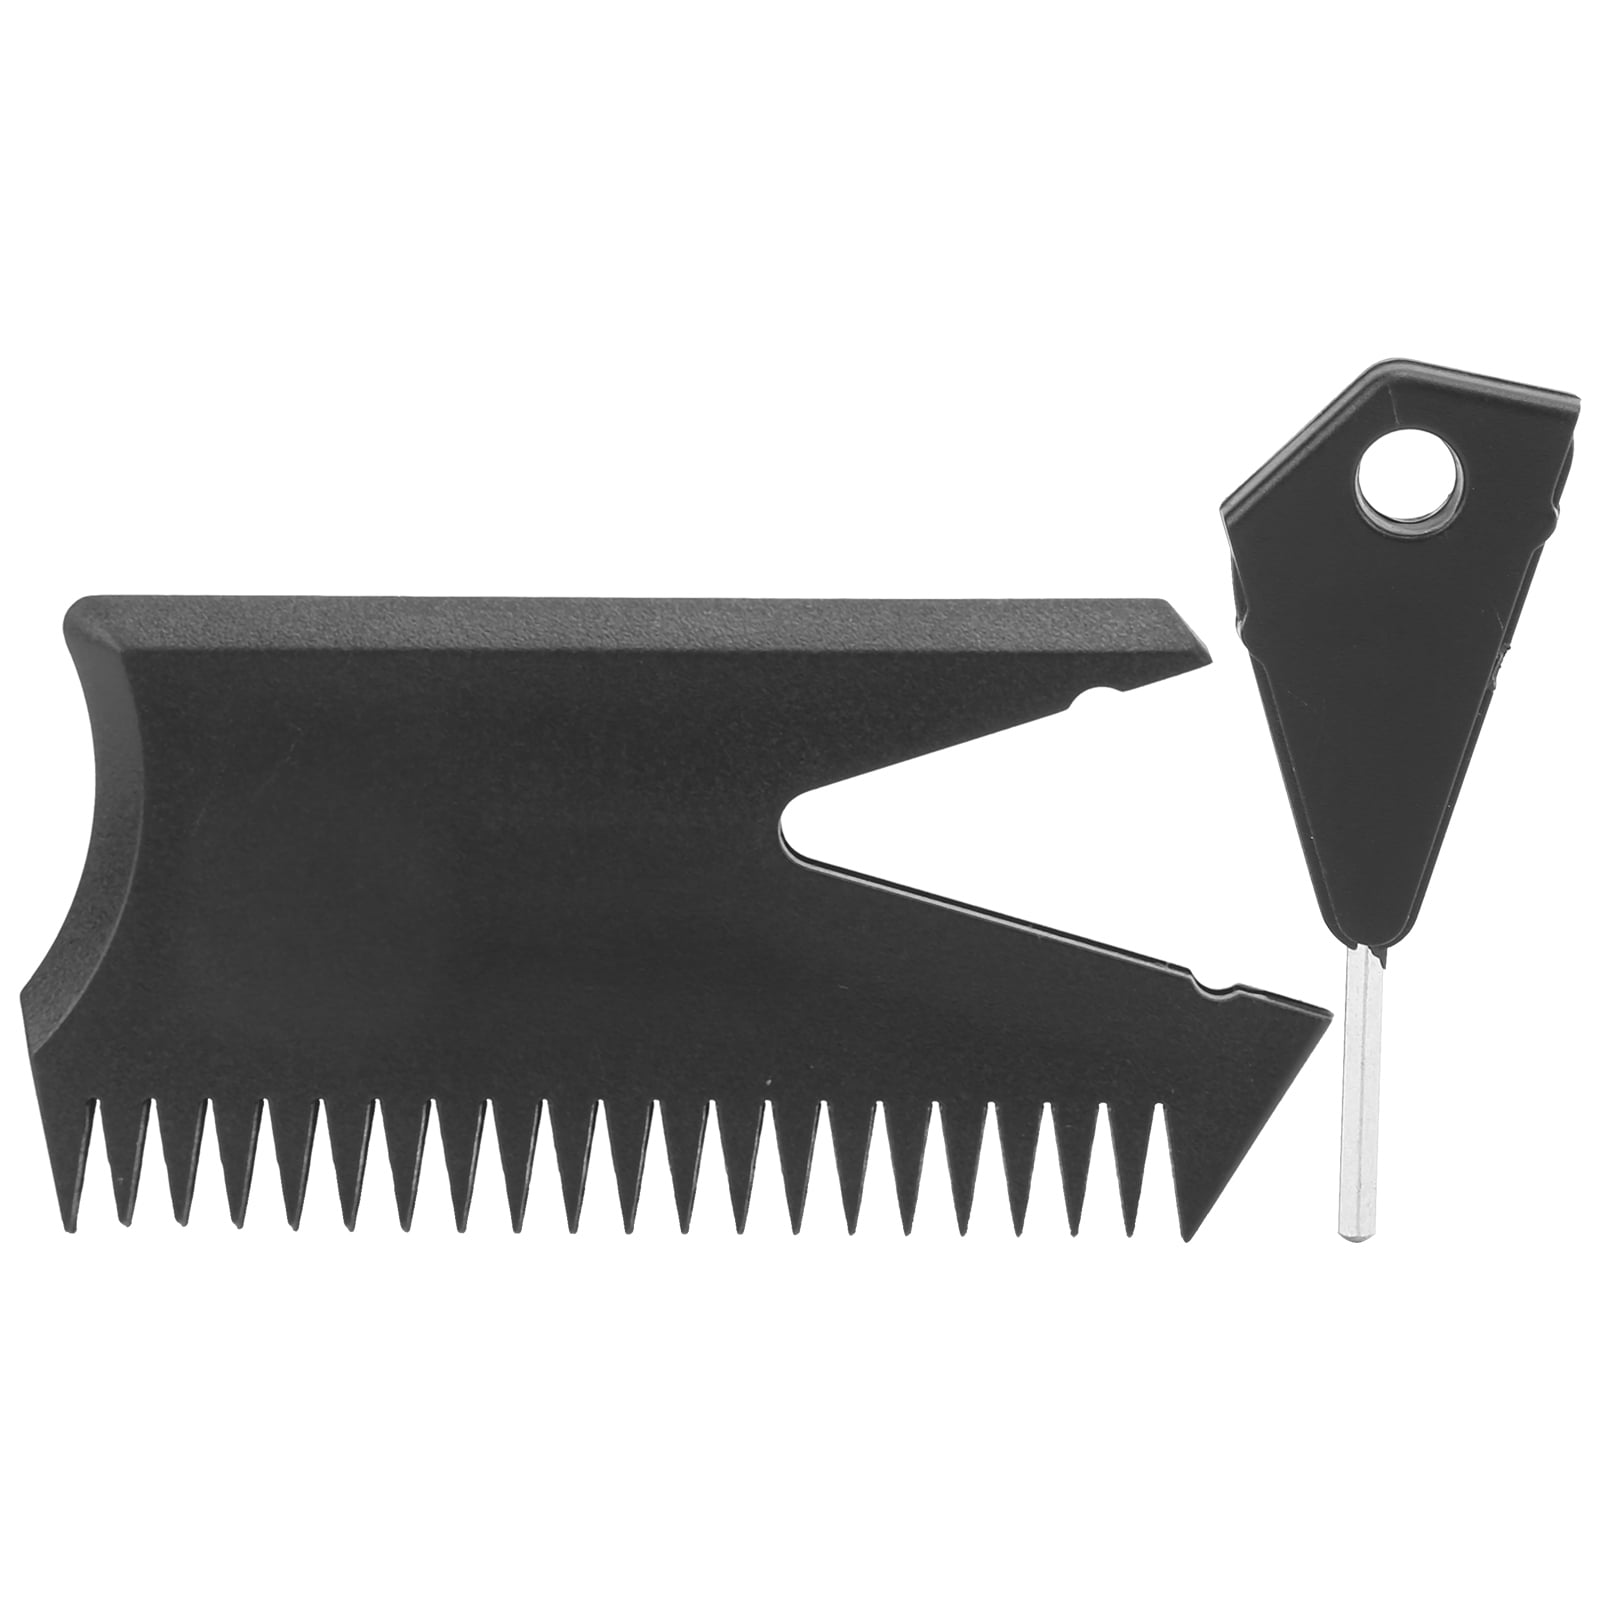 1pc Surfboard Wax Comb With Fin Key Surf Board Wax Comb Cleaning Remove.USR DP 